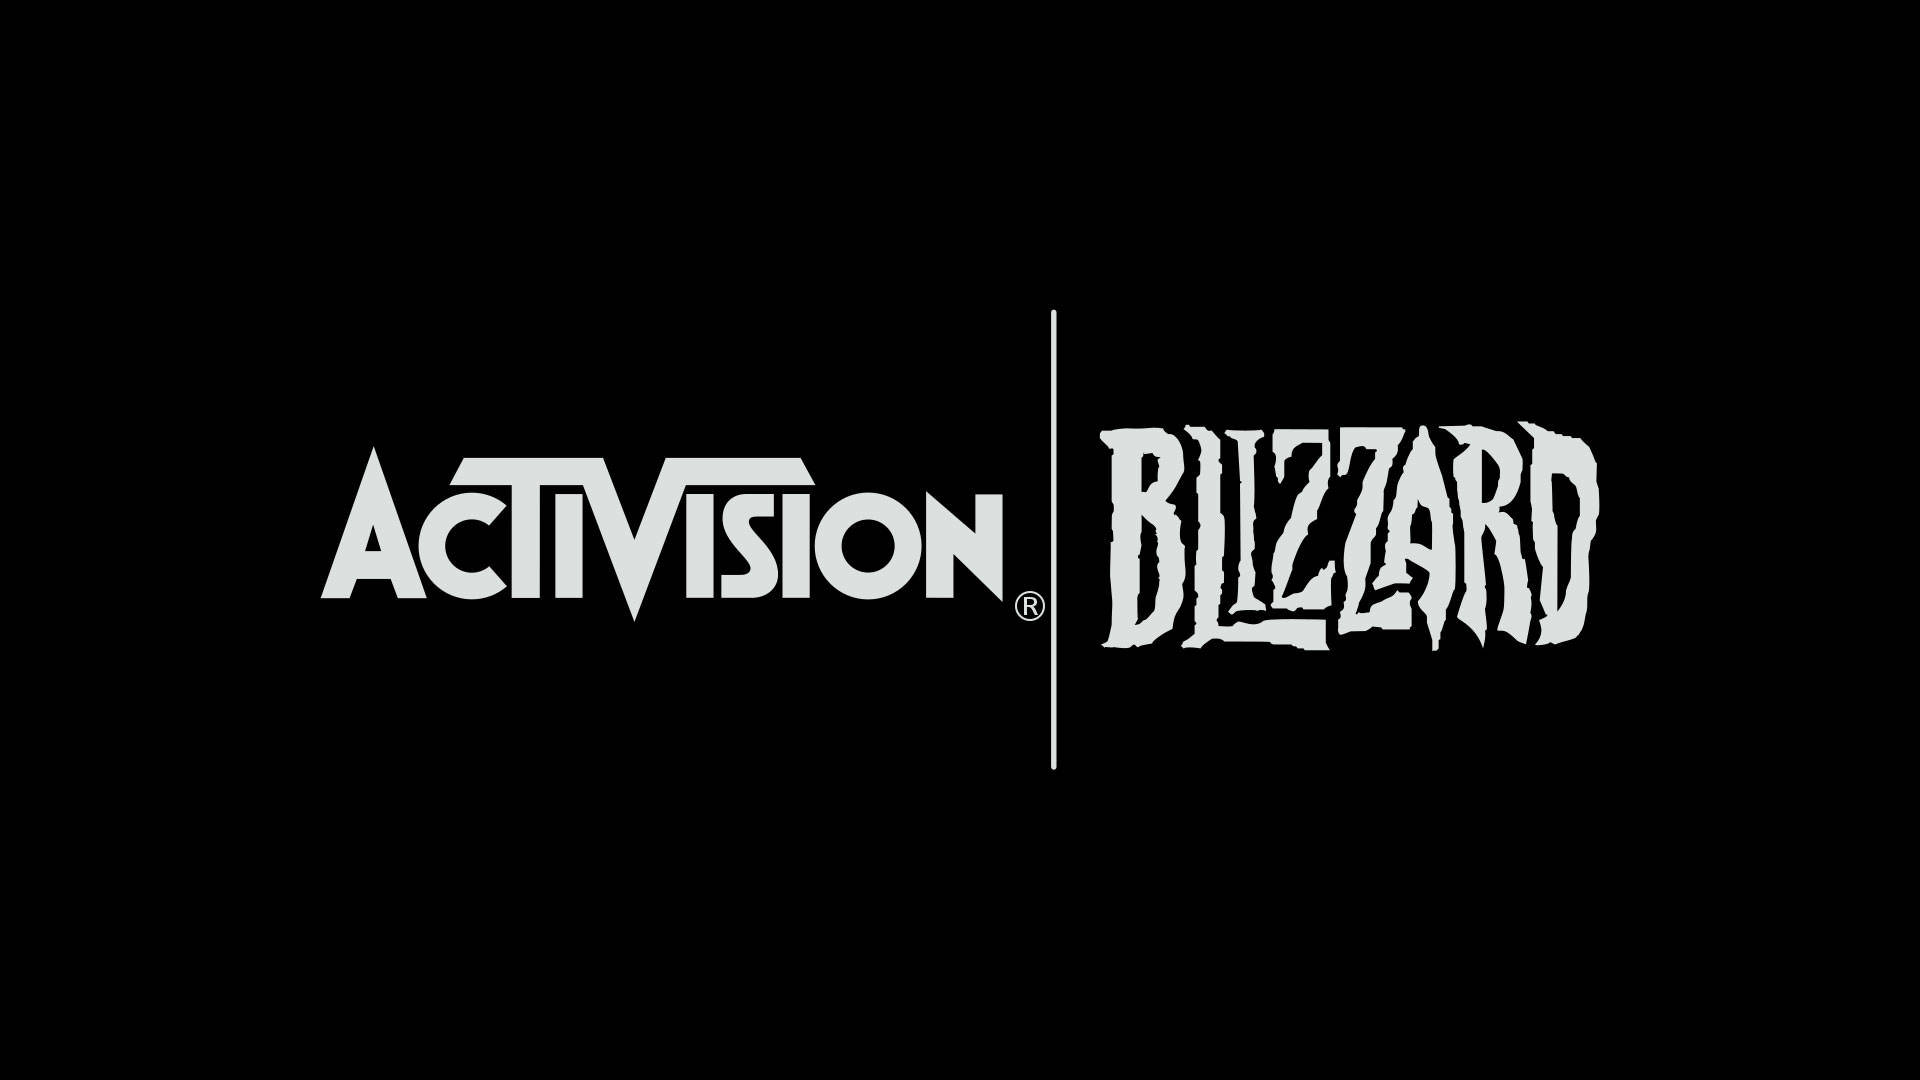 Destin on X: Now that Microsoft can buy Activision, if this is a